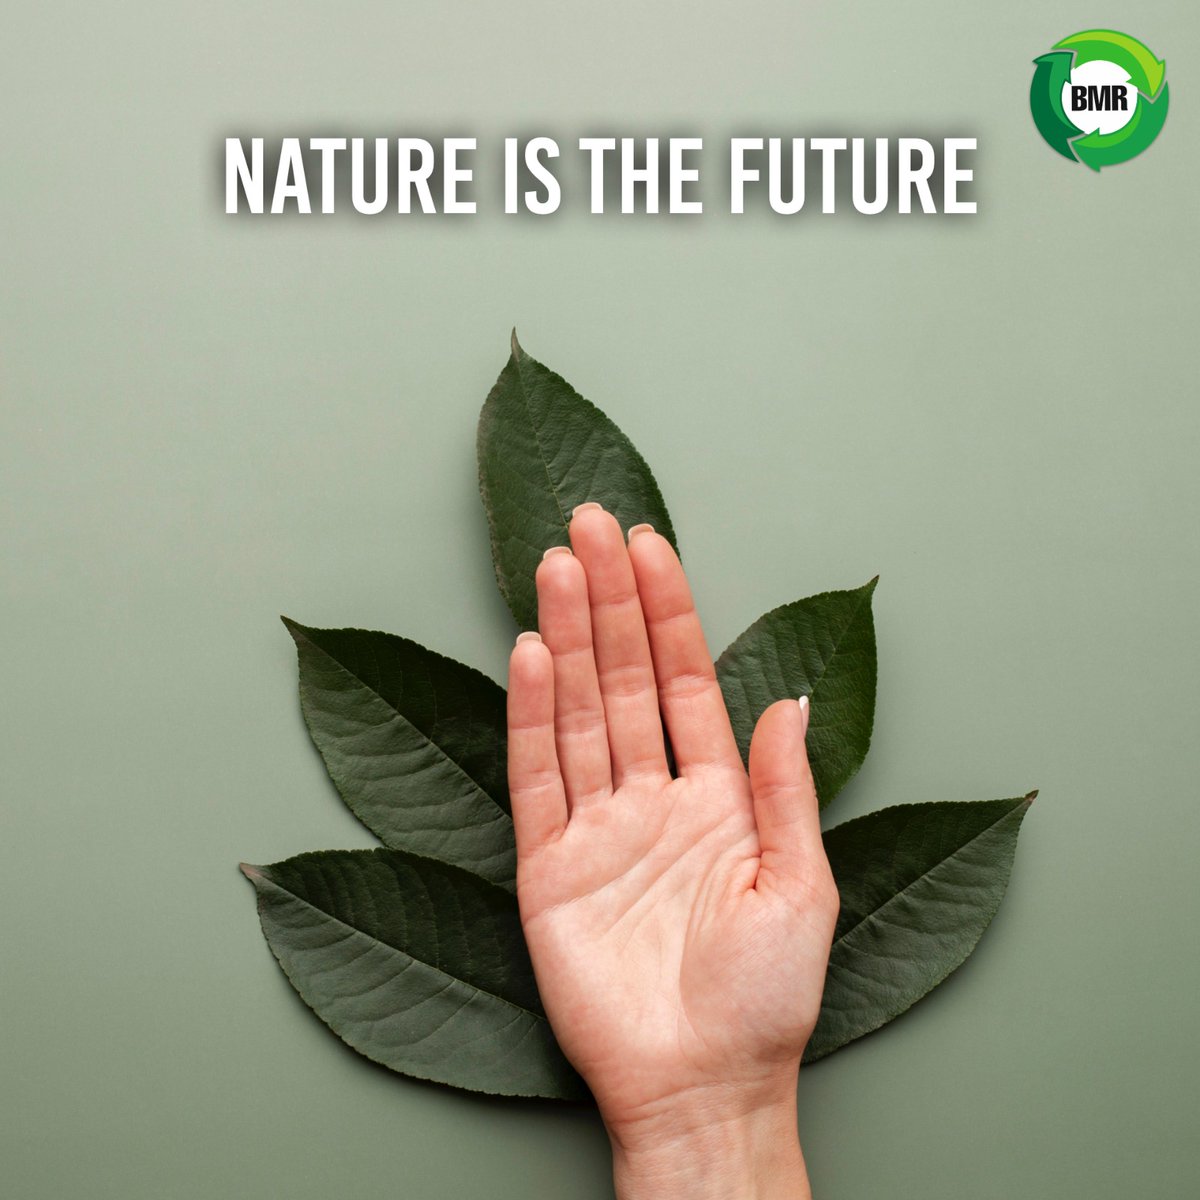 The future lies in our hand. 

#metalrecycling #earth #recyclingindustries #savefuture #BMR #event #recycling